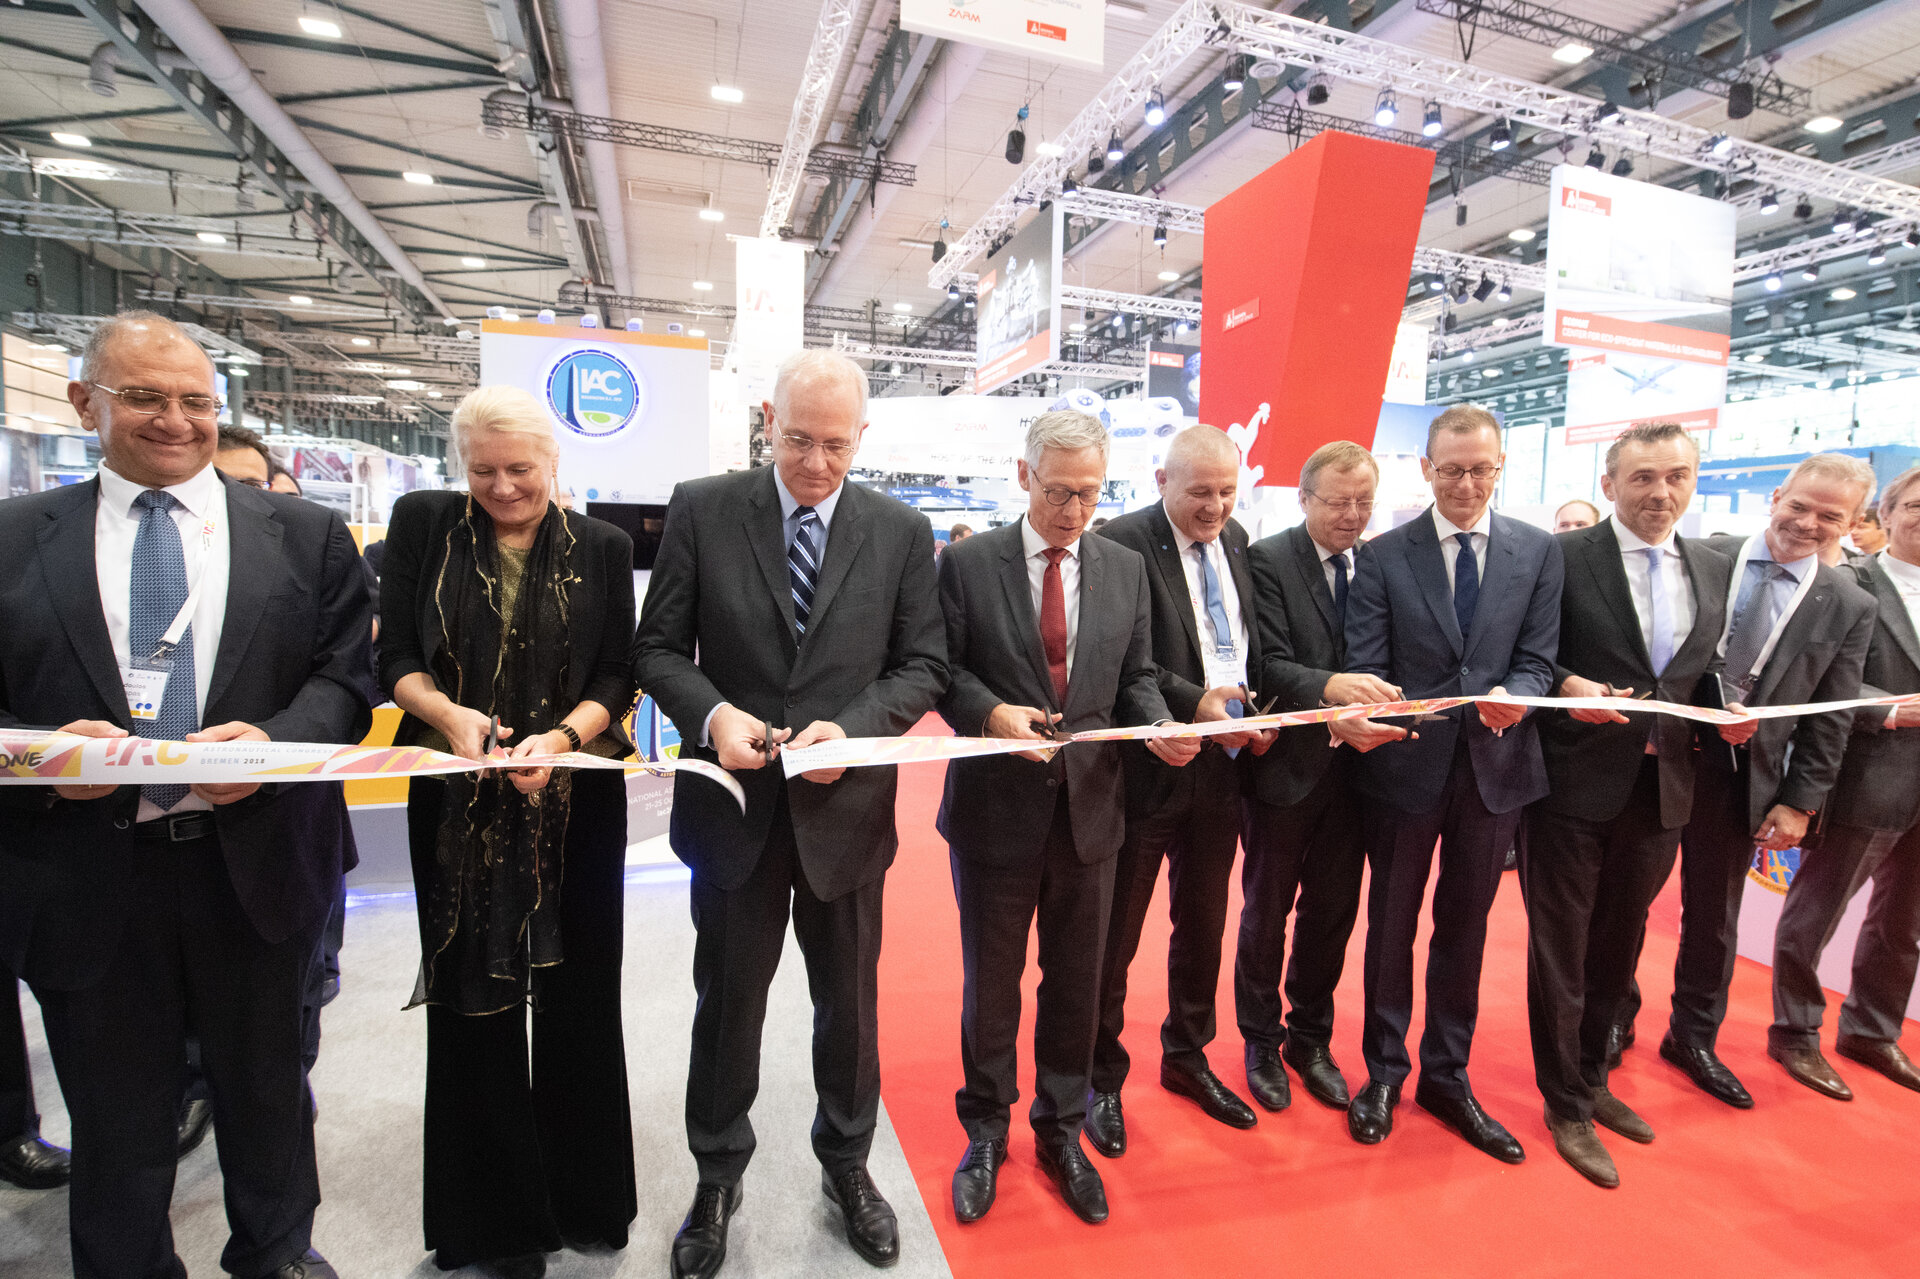 Dignitaries open the exhibition area at IAC 2018